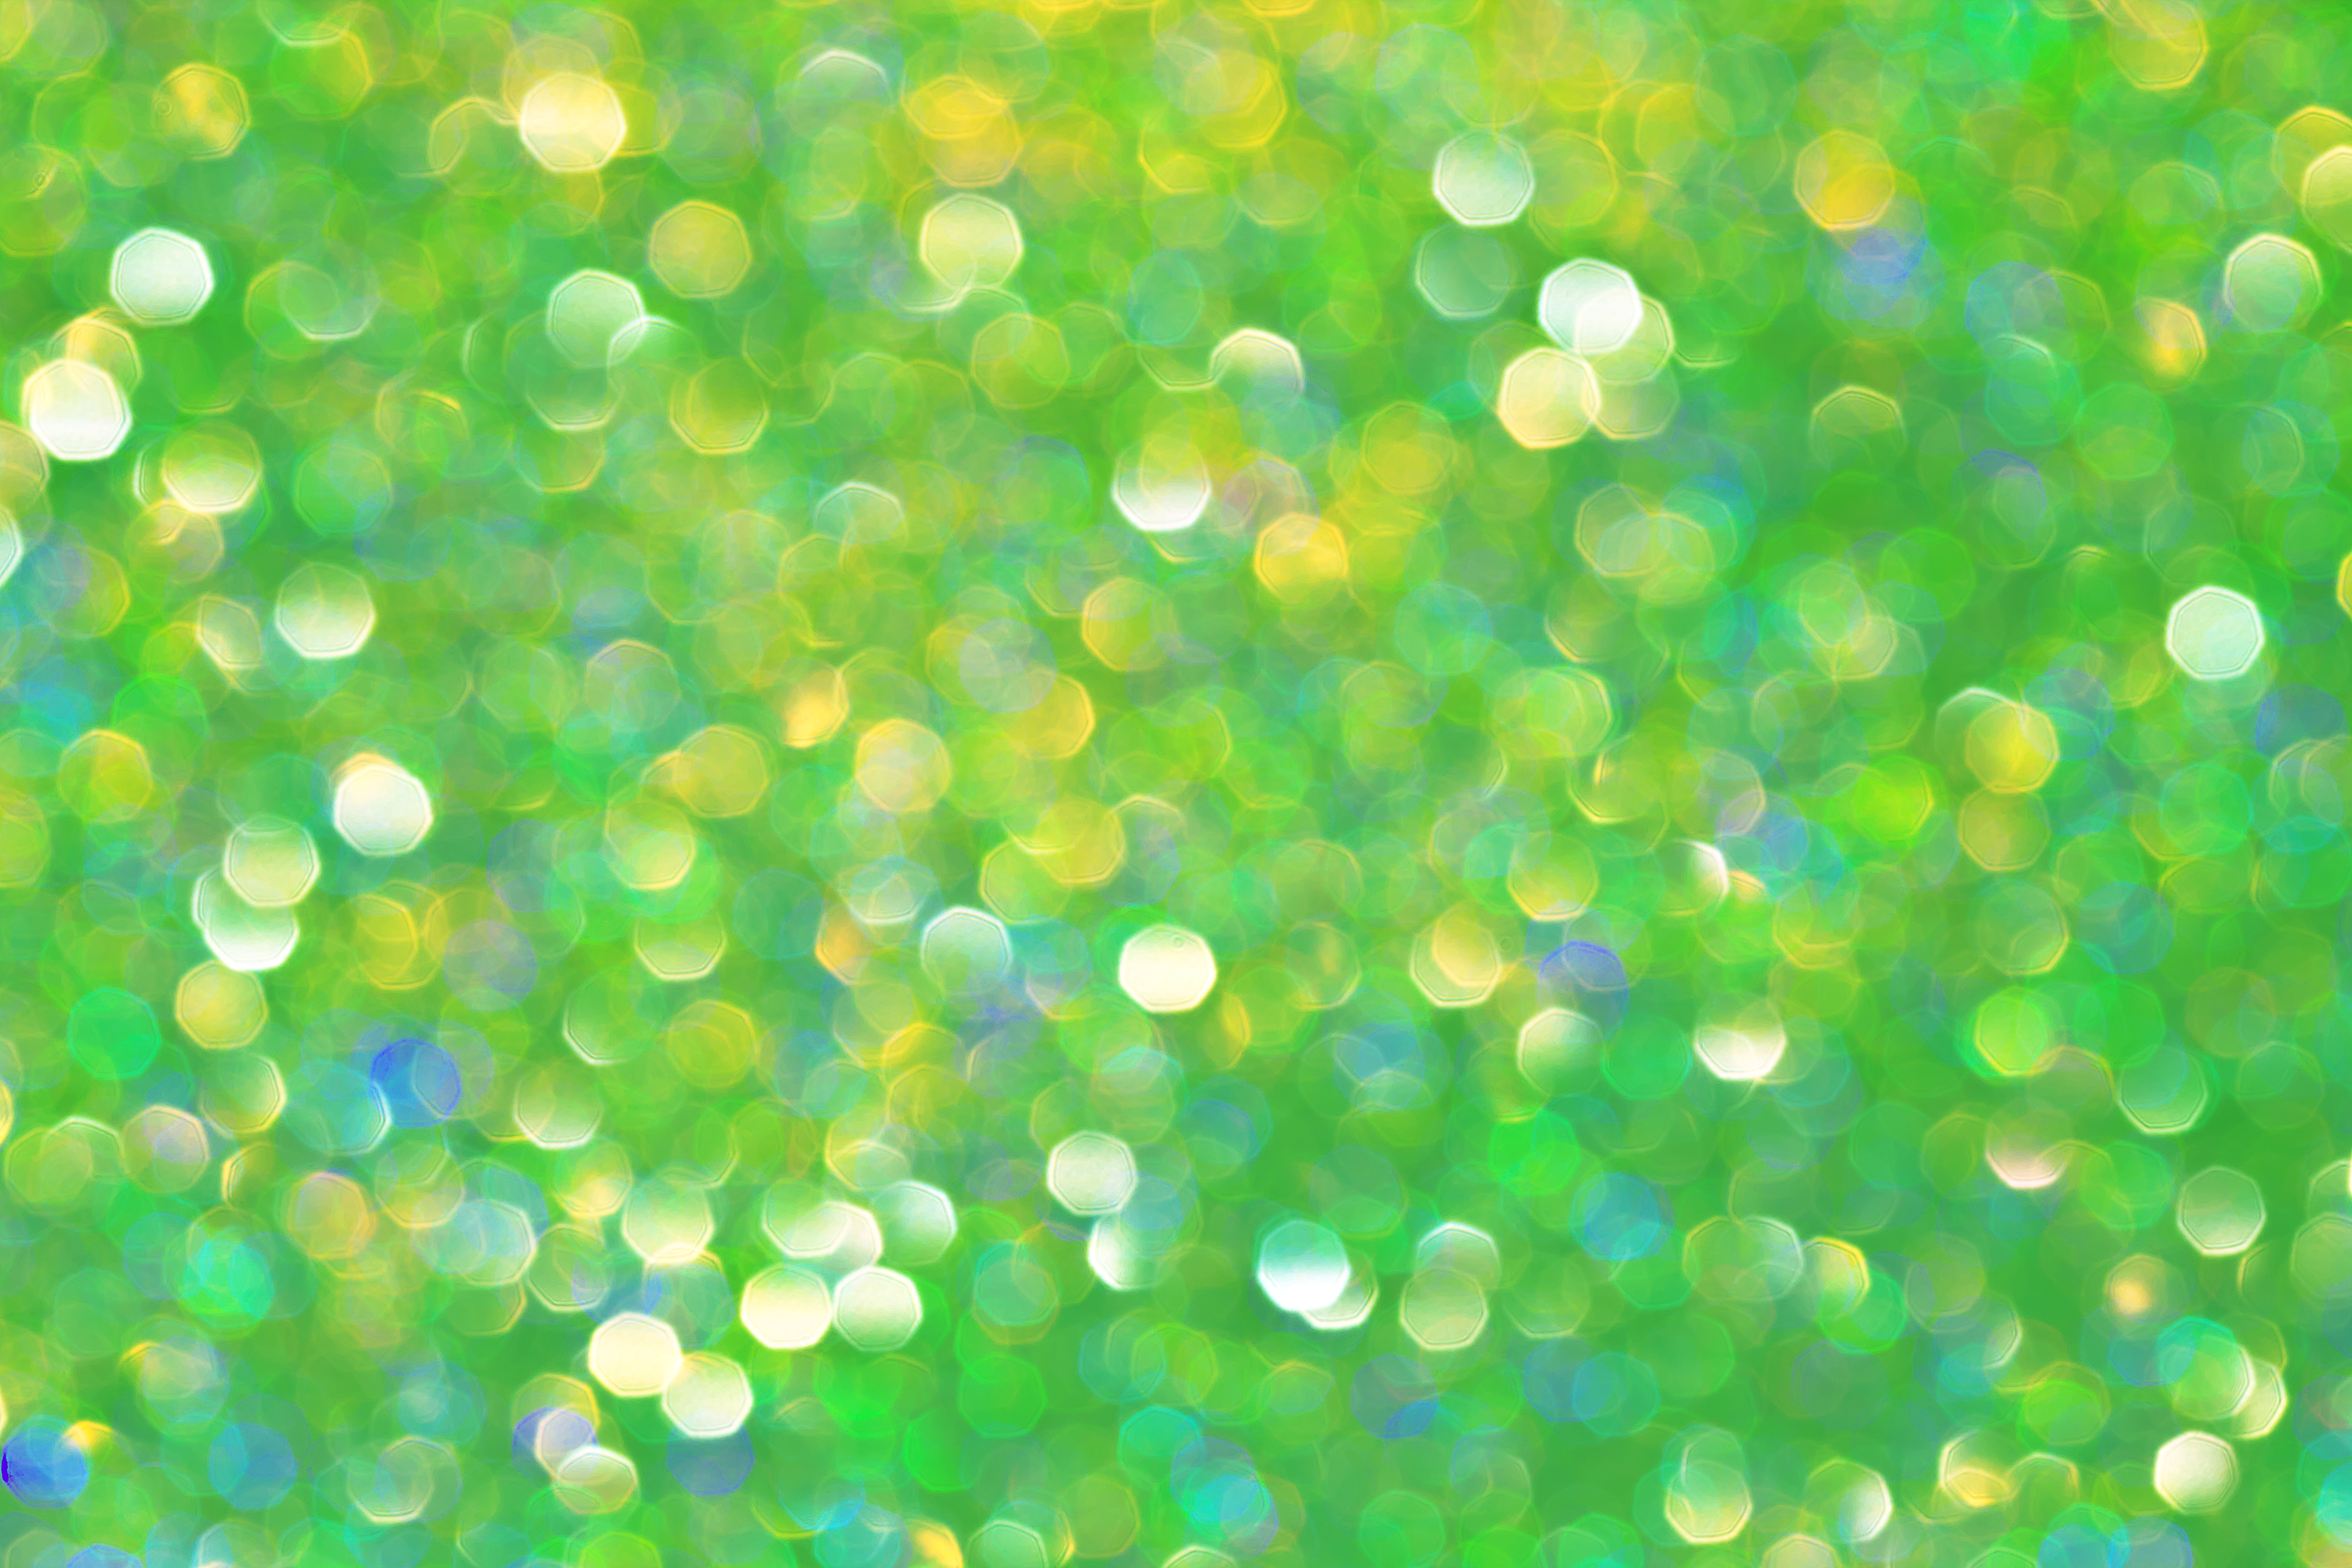 boquet, shine, glare, abstract, green, circles, brilliance, bokeh wallpapers for tablet